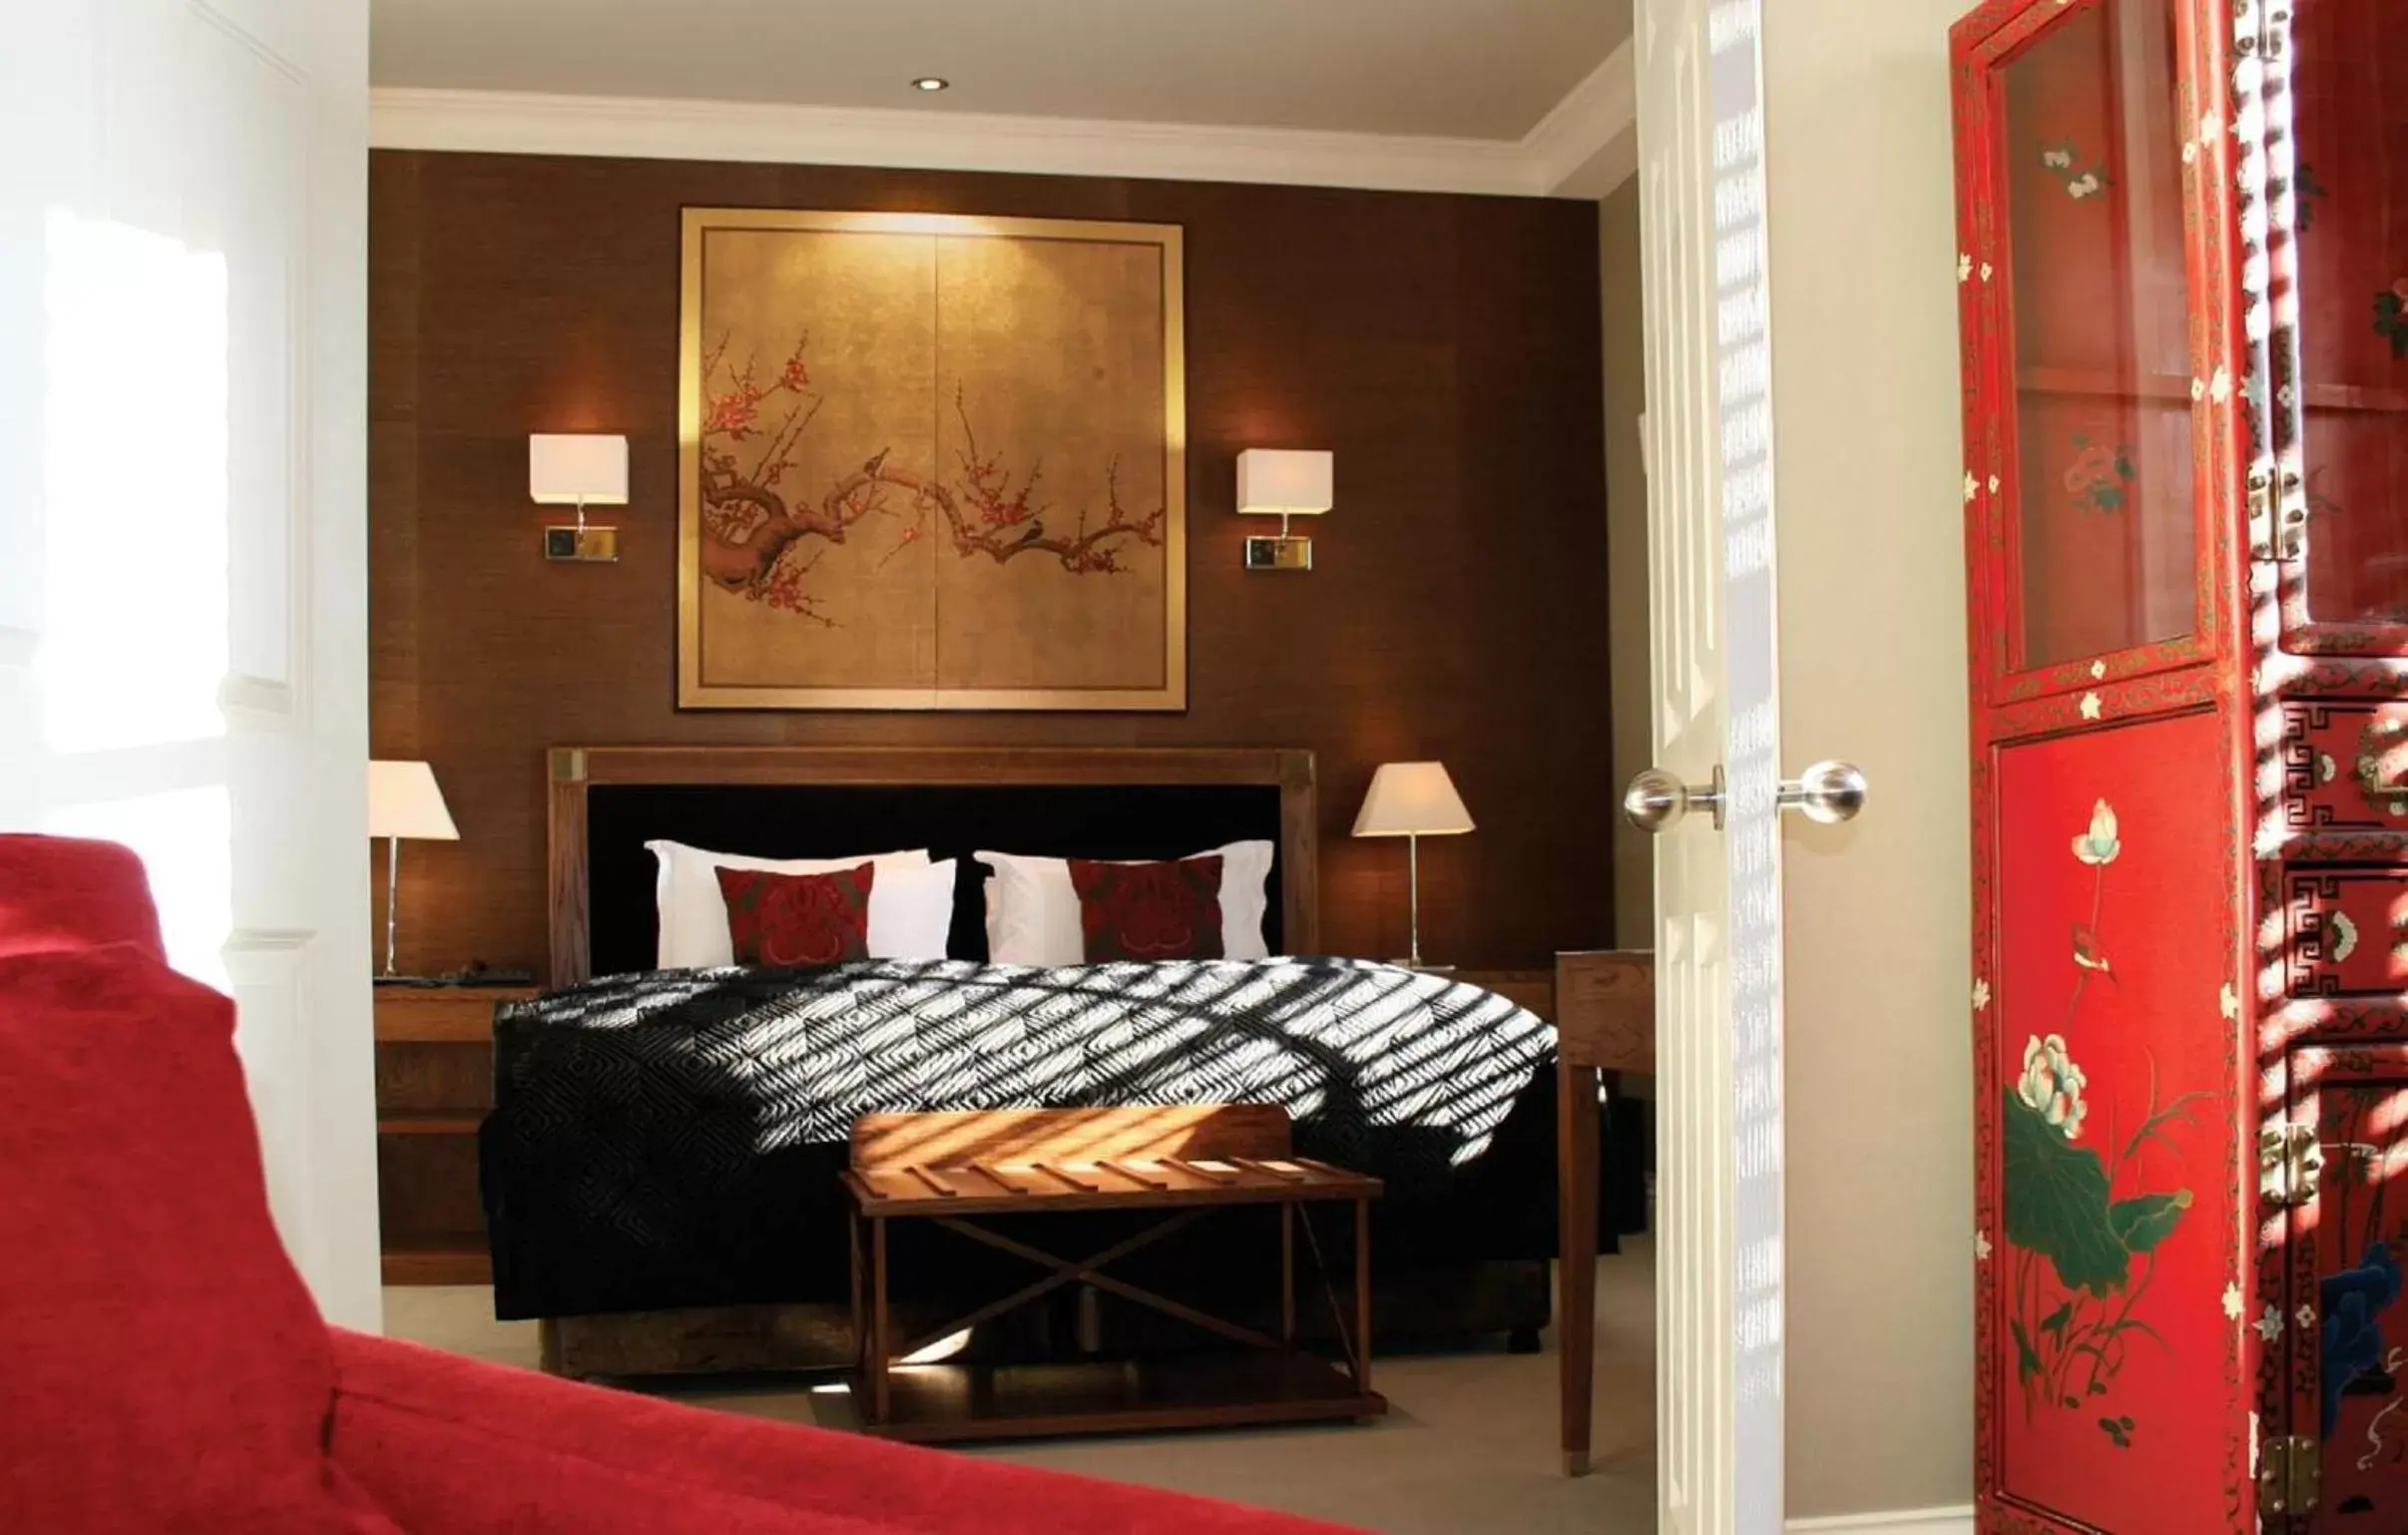 Bed in St Michael's Manor Hotel - St Albans